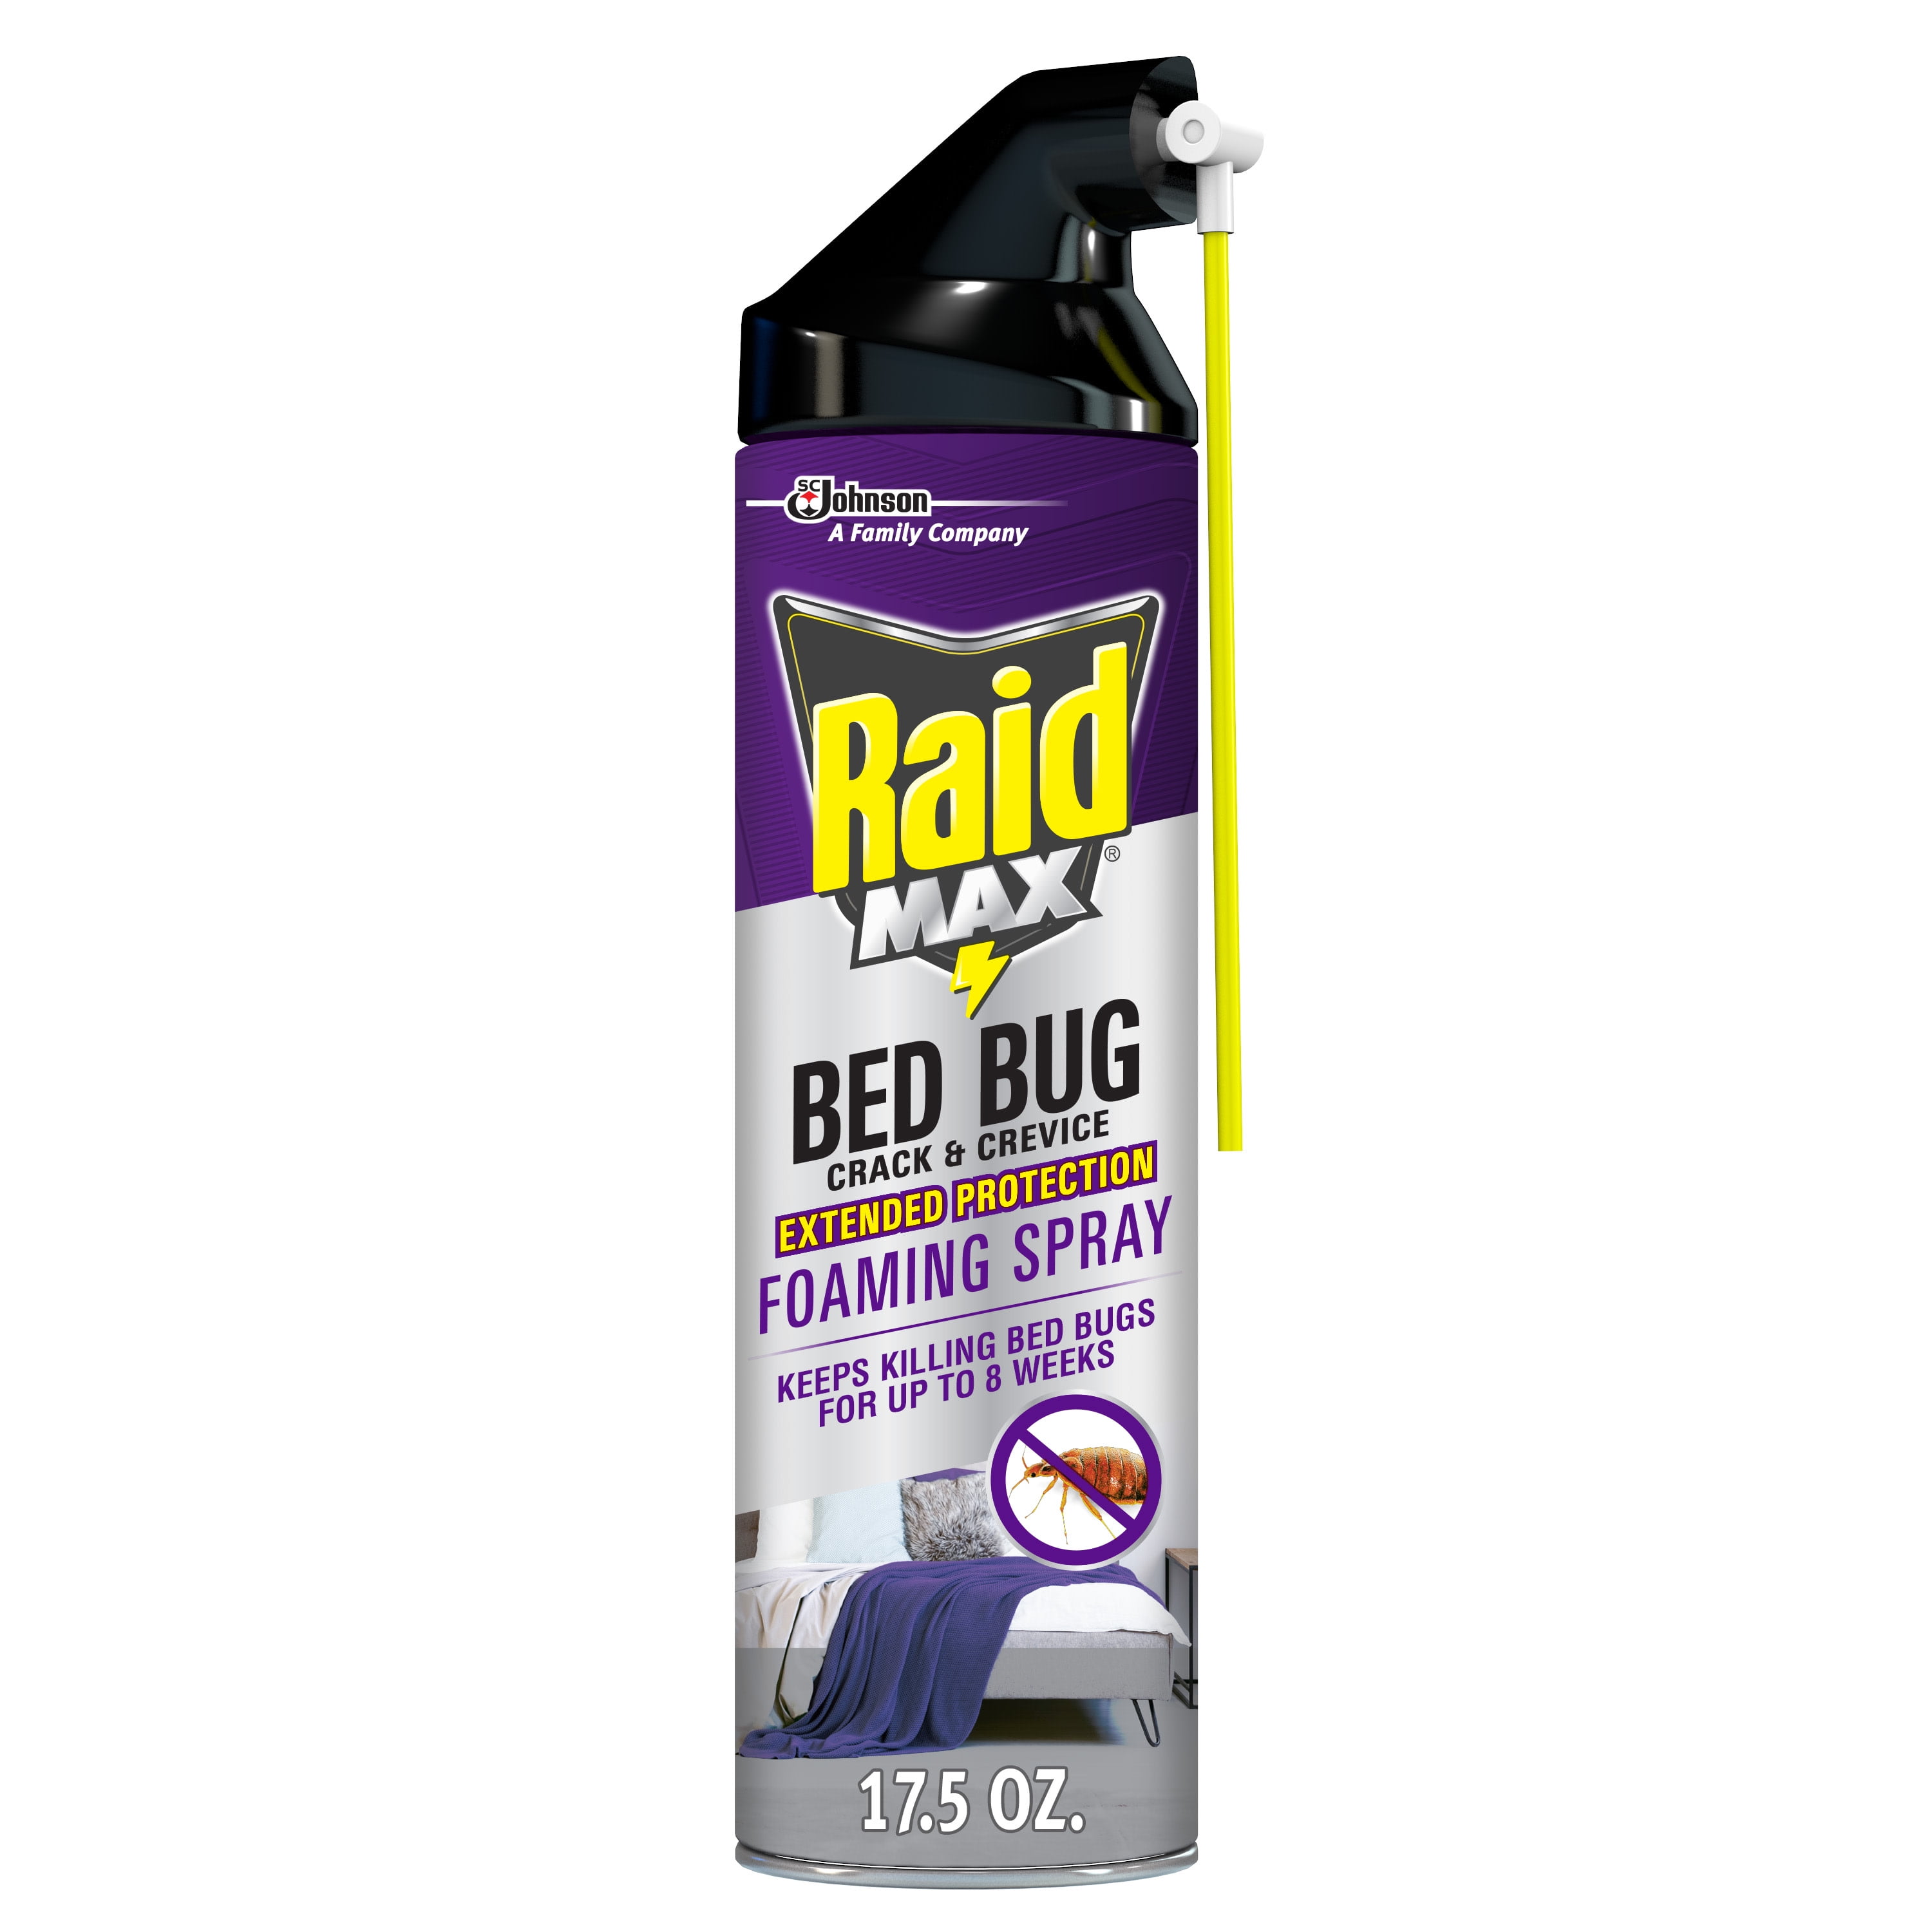 Raid MAX Bed Bug and Flea Killer Crack & Crevice Extended Protection Foaming Spray, 17.5 Oz, Indoor Bed Bug Killer for Use on Mattresses, Wood Furniture and Carpet, non-staining